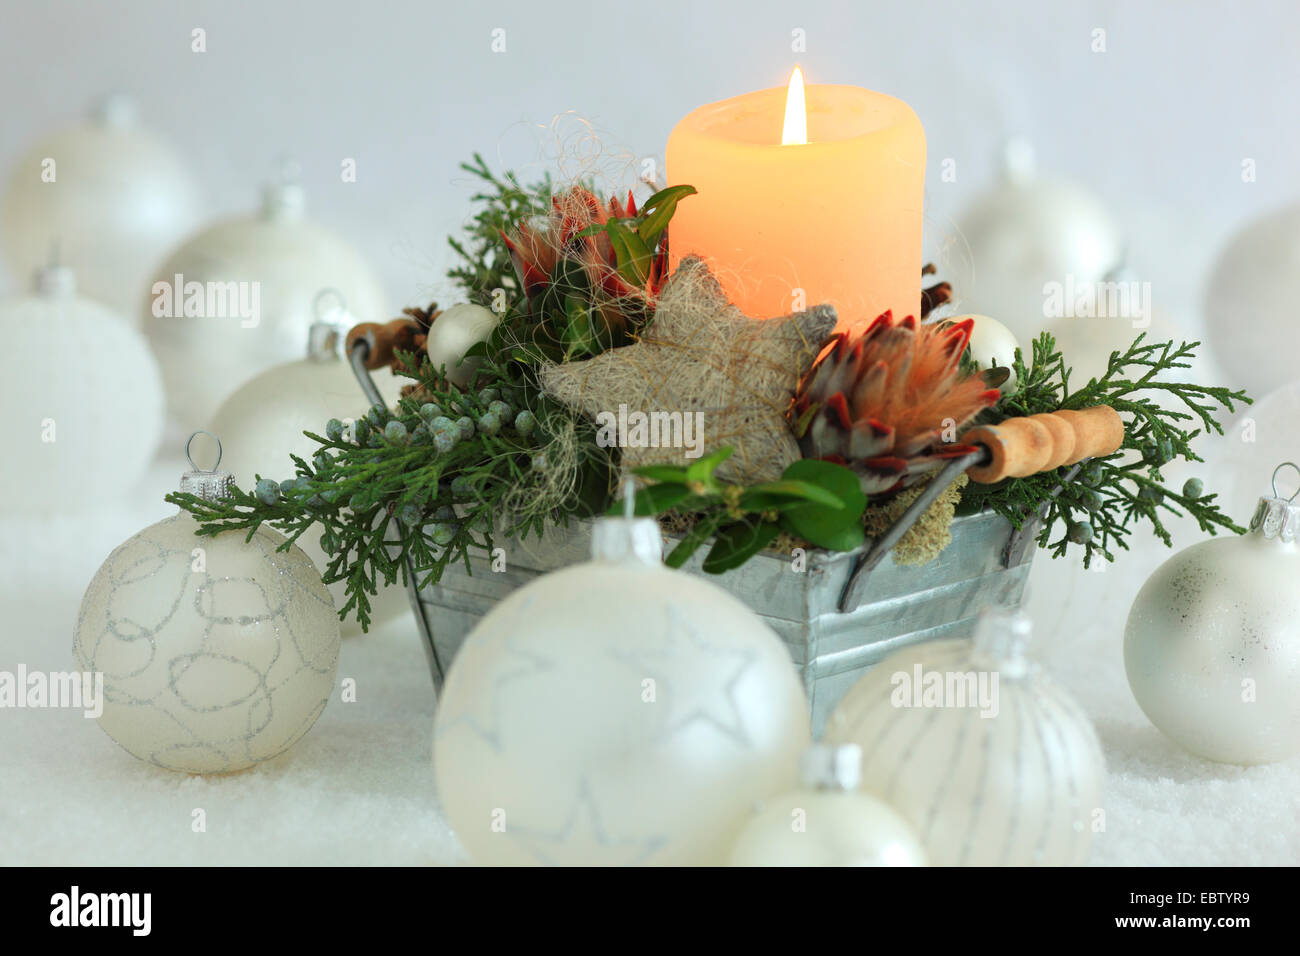 Christmas floral arrangement with candle and Christmas baubles Stock Photo